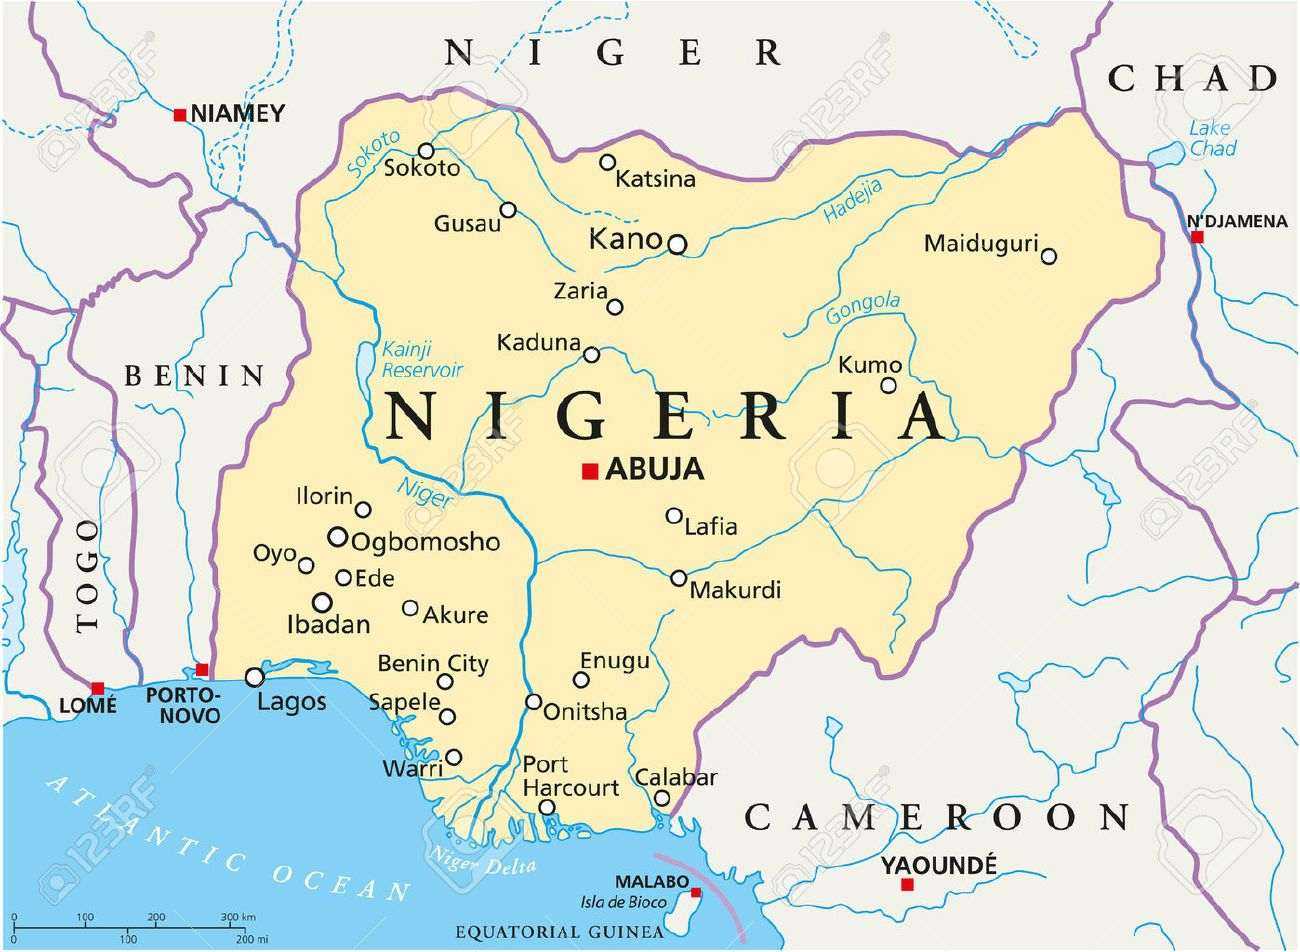 nigeria-political-map-with-capital-abuja-national-borders-most-important-cities-rivers-and-lakes.jpg